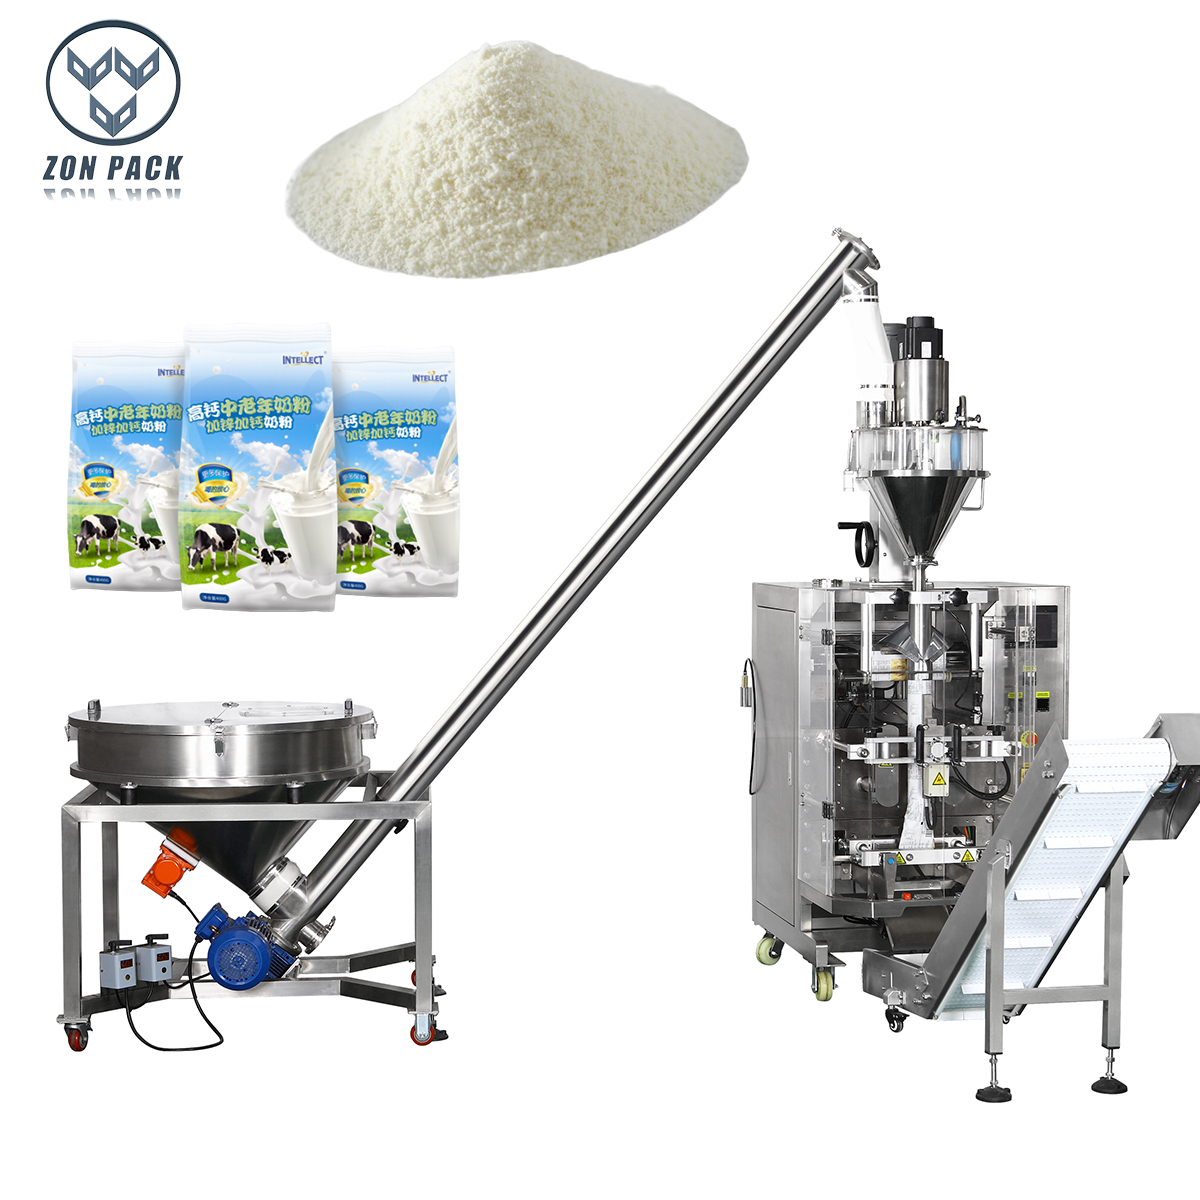 Top Seed Packet Filling Machine in the Market